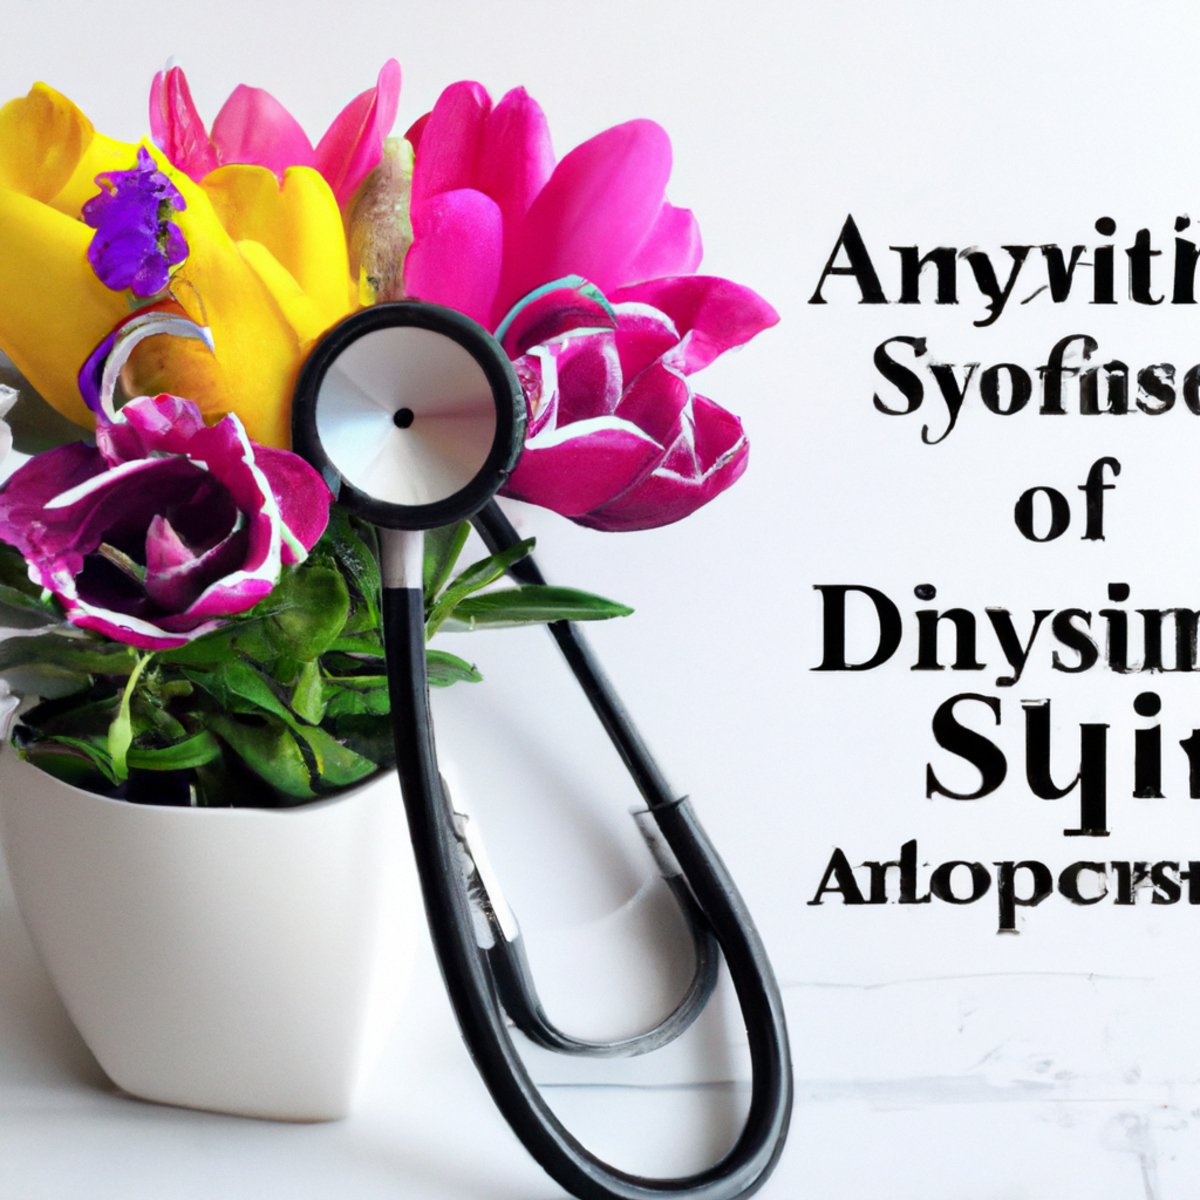 Vibrant bouquet of flowers and stethoscope symbolize resilience, growth, and medical journey in Alport Syndrome article.